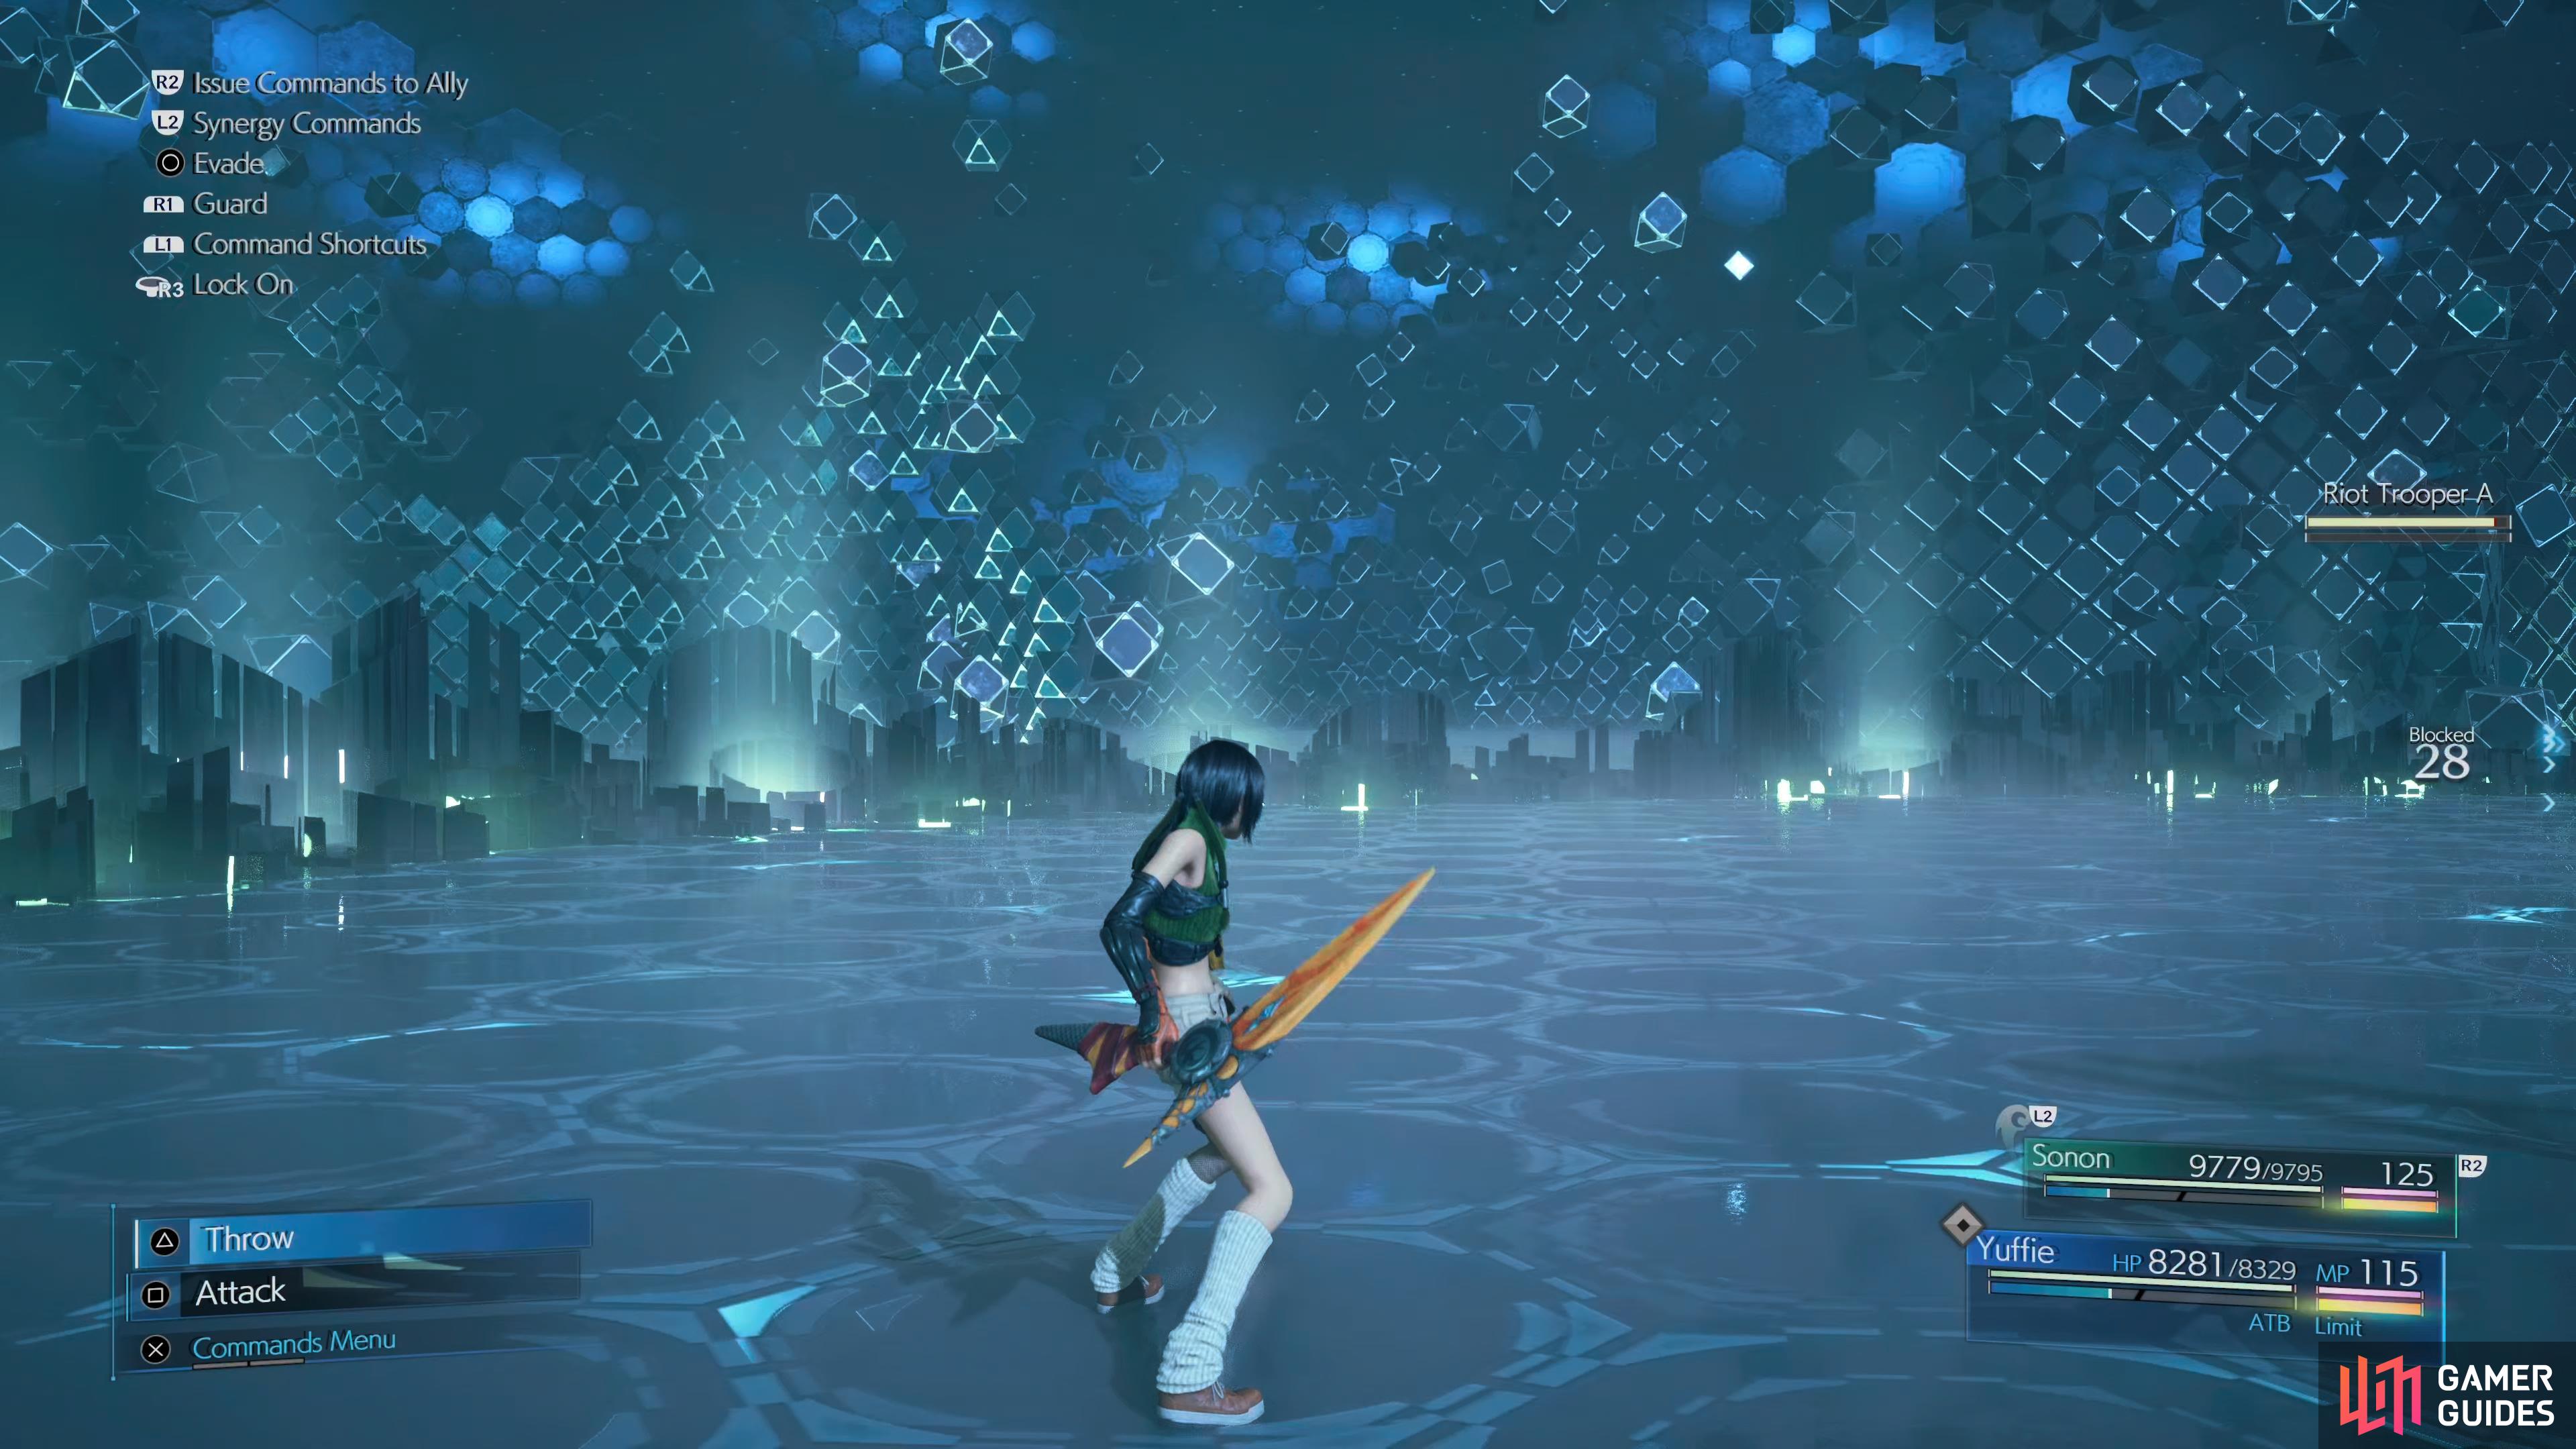 The Boomerang is the second weapon for Yuffie in INTERmission.